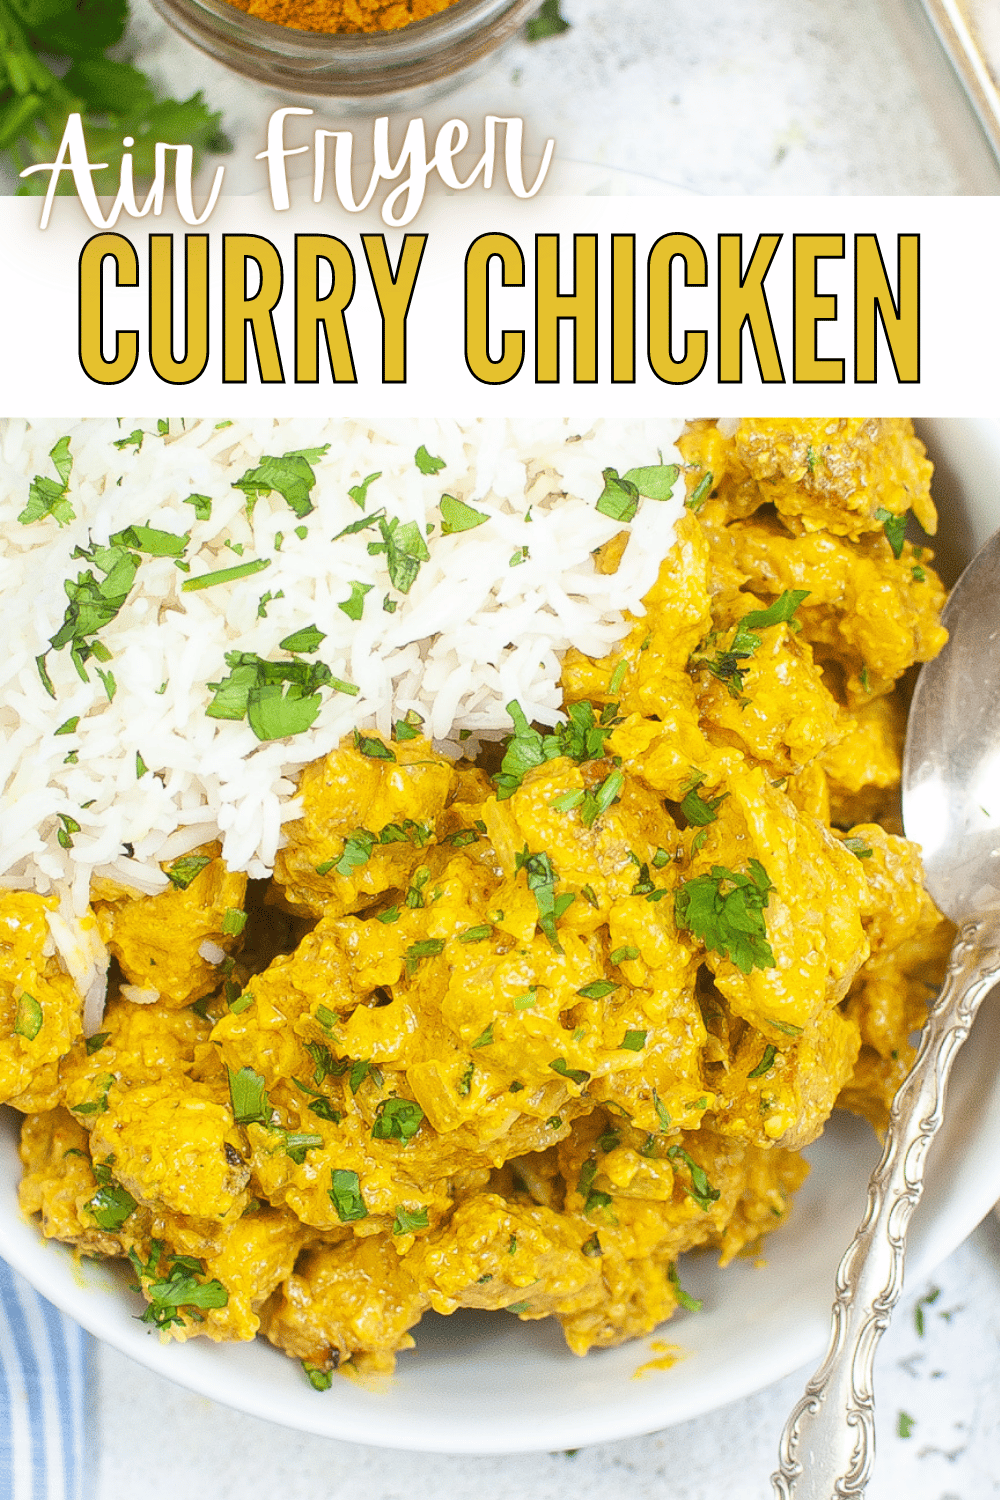 This Air Fryer Curry Chicken is a quick and easy way to get your curry fix! This recipe is a great way to enjoy a takeout favorite at home. #airfryer #currychicken #curry #chicken via @wondermomwannab